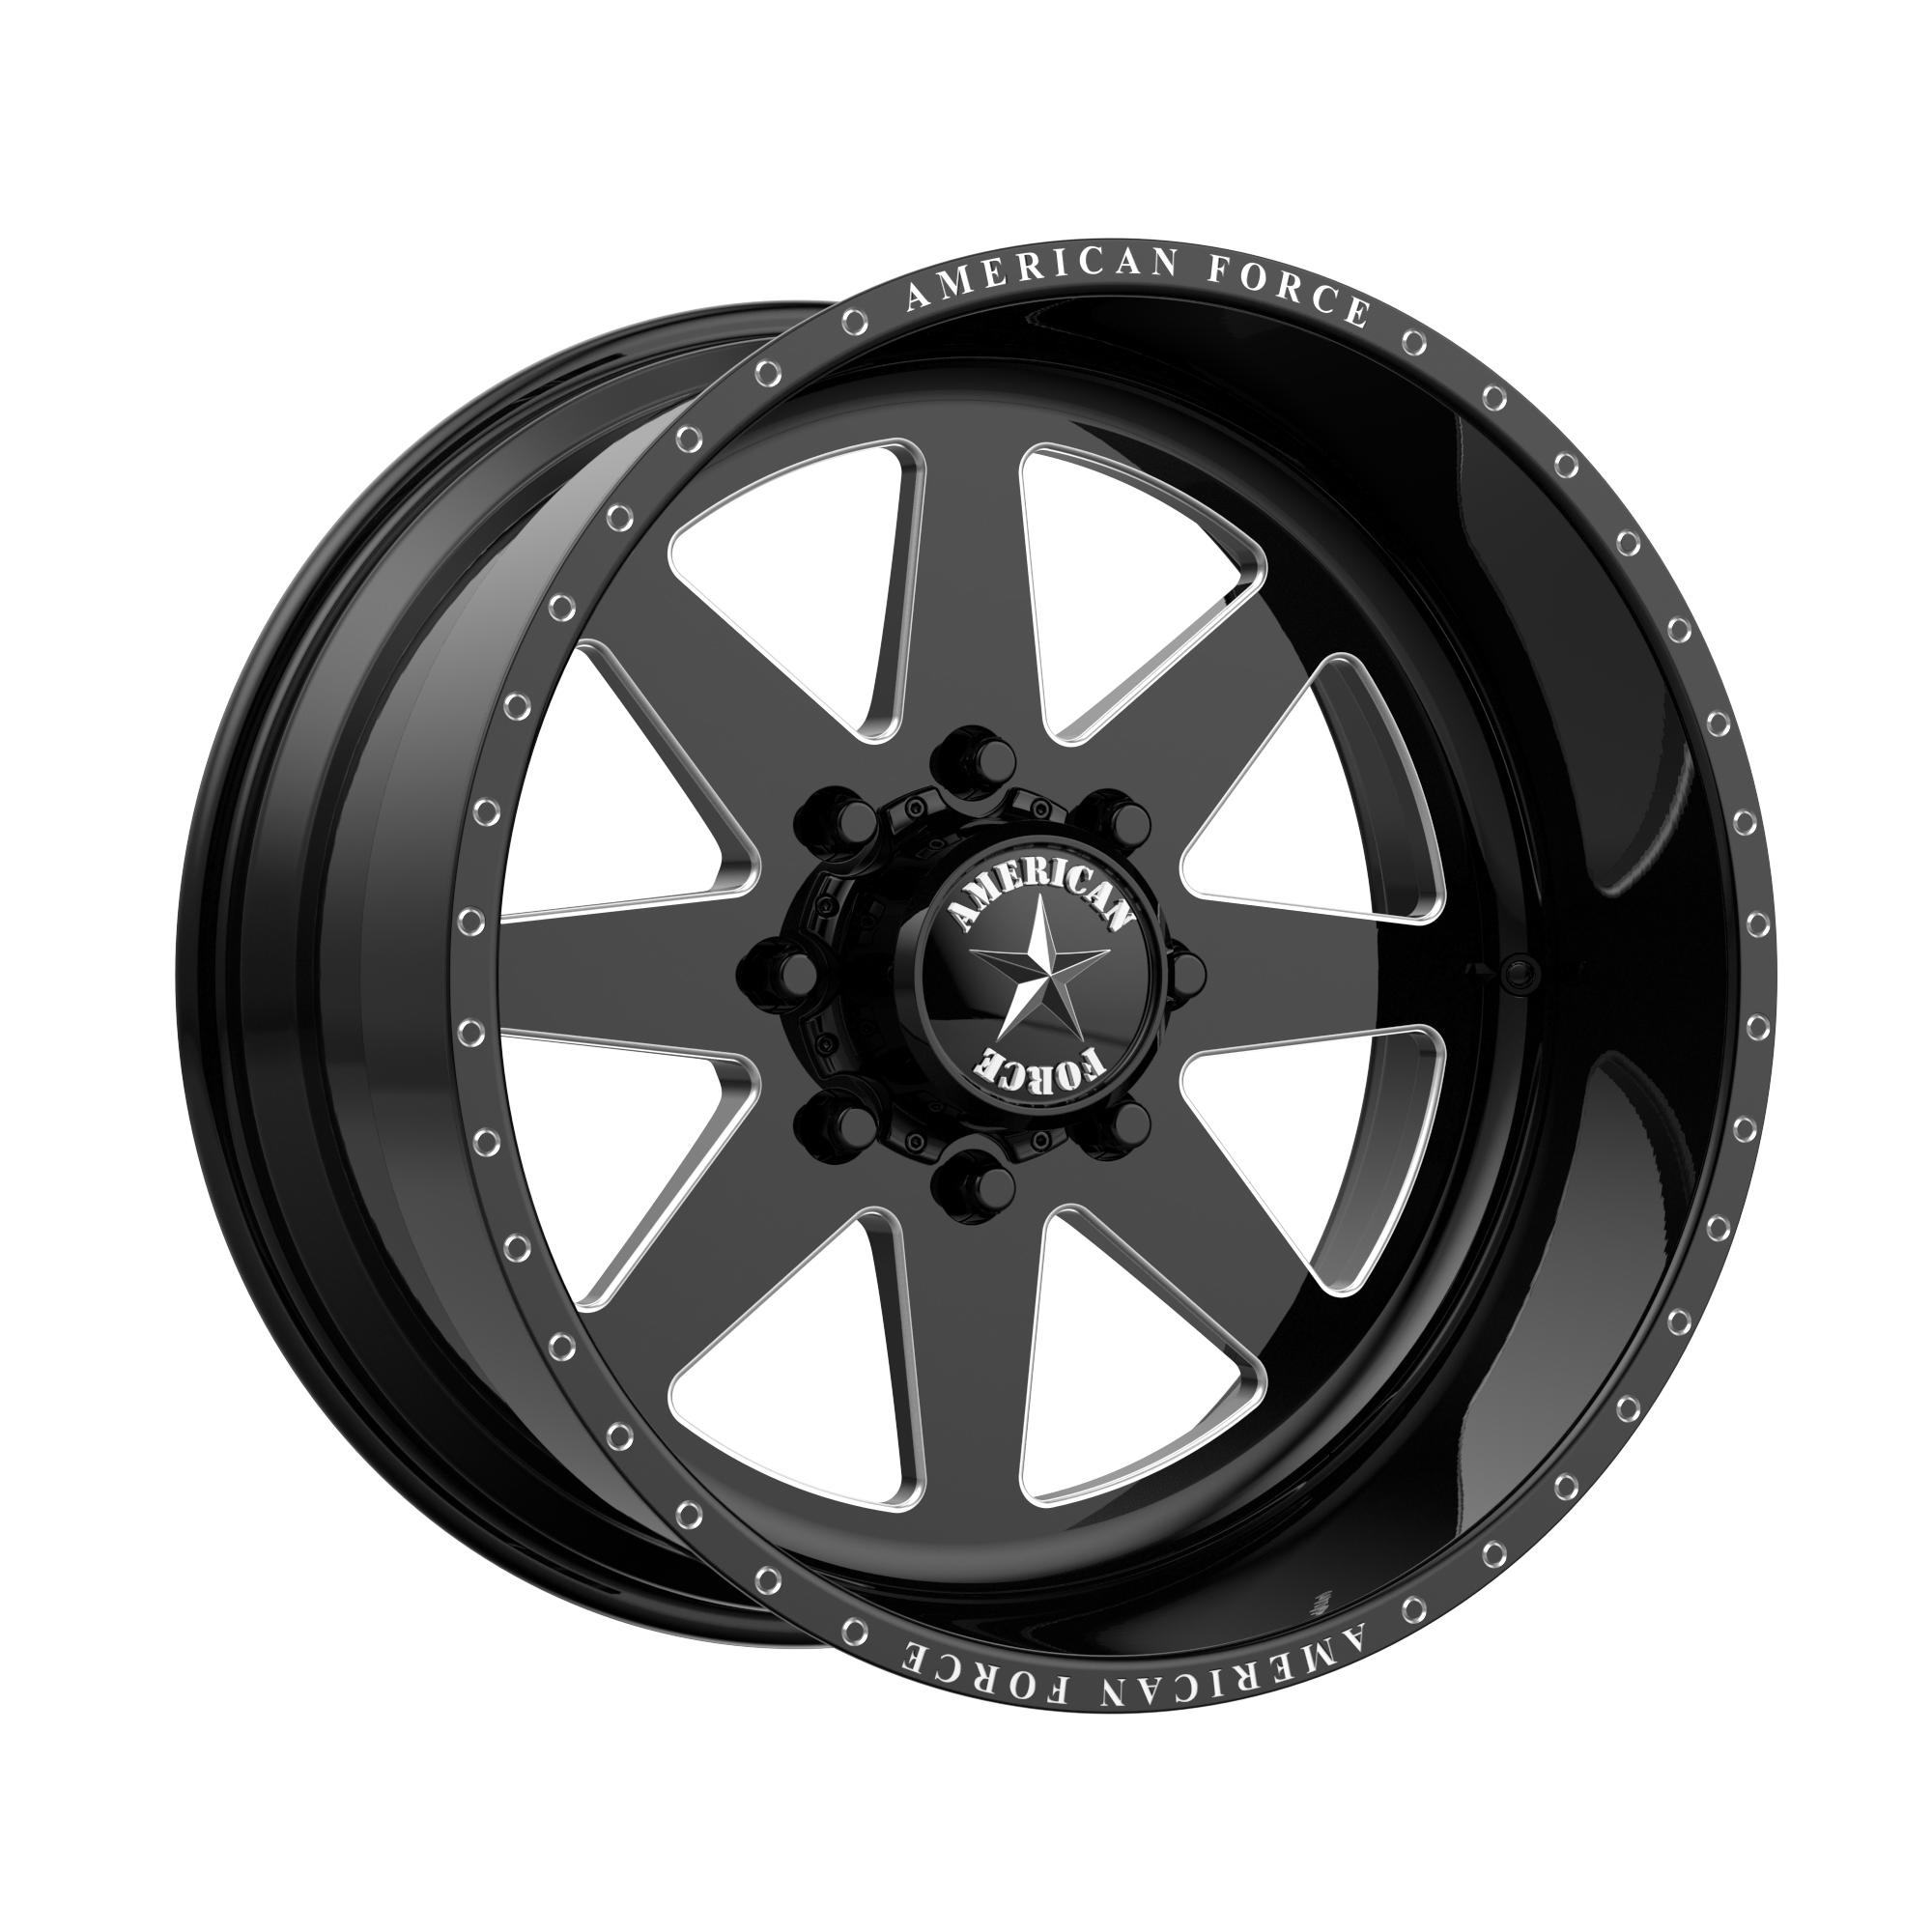 INDEPENDENCE SS 20x12 8x180.00 GLOSS BLACK MACHINED (-40 mm) - Tires and Engine Performance